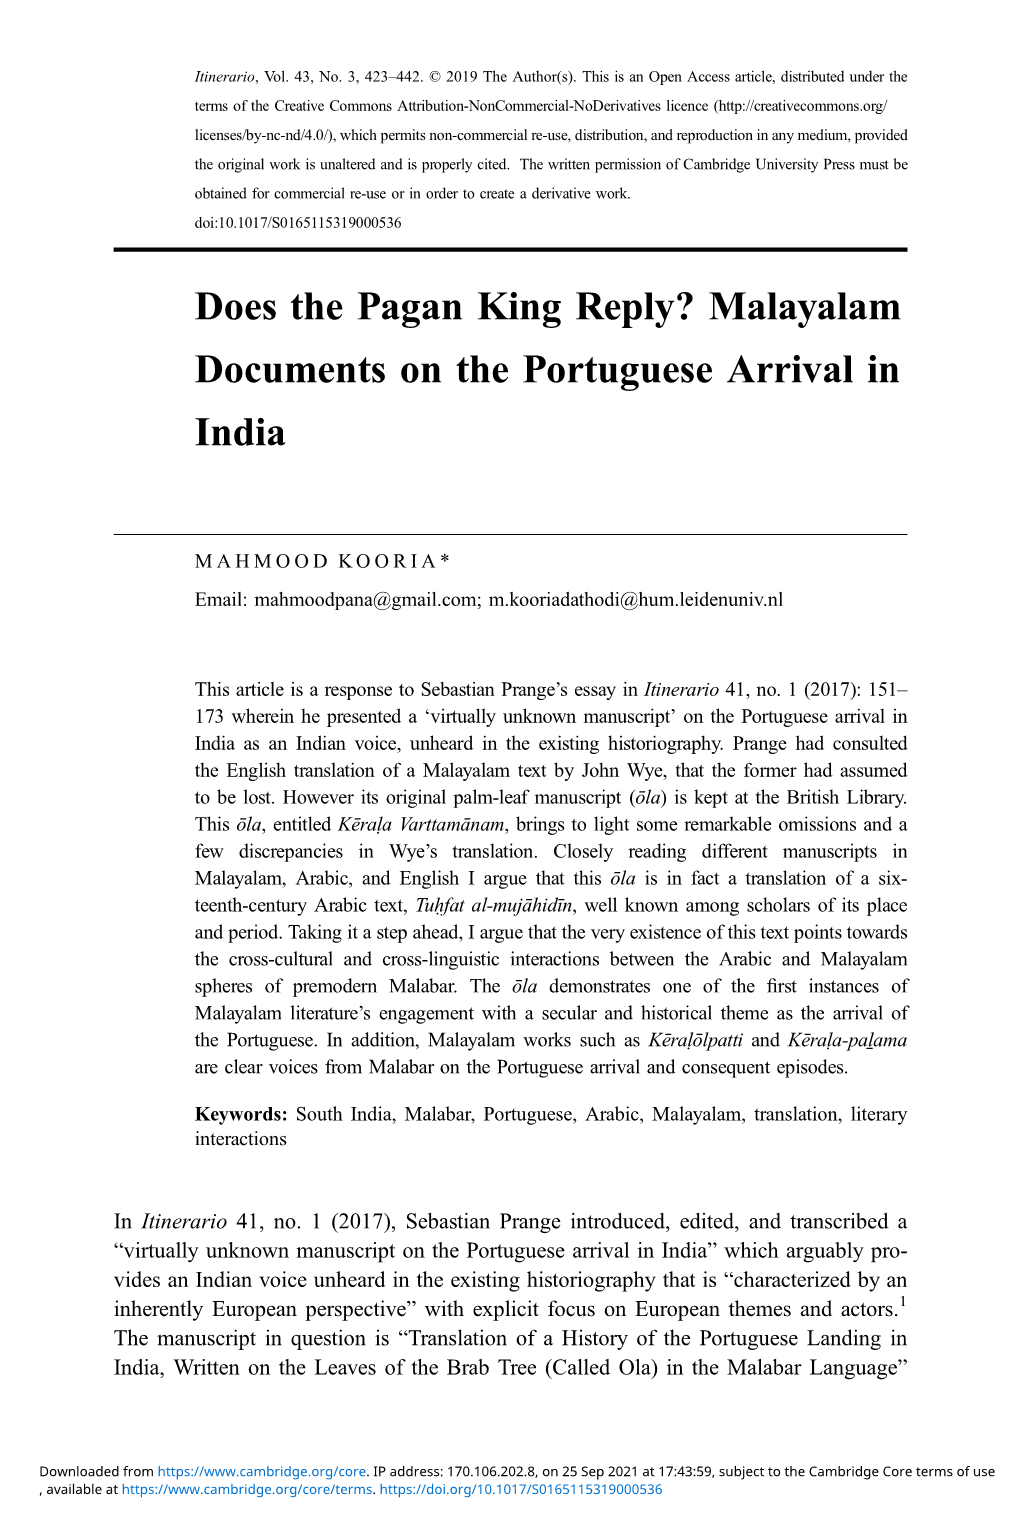 Malayalam Documents on the Portuguese Arrival in India